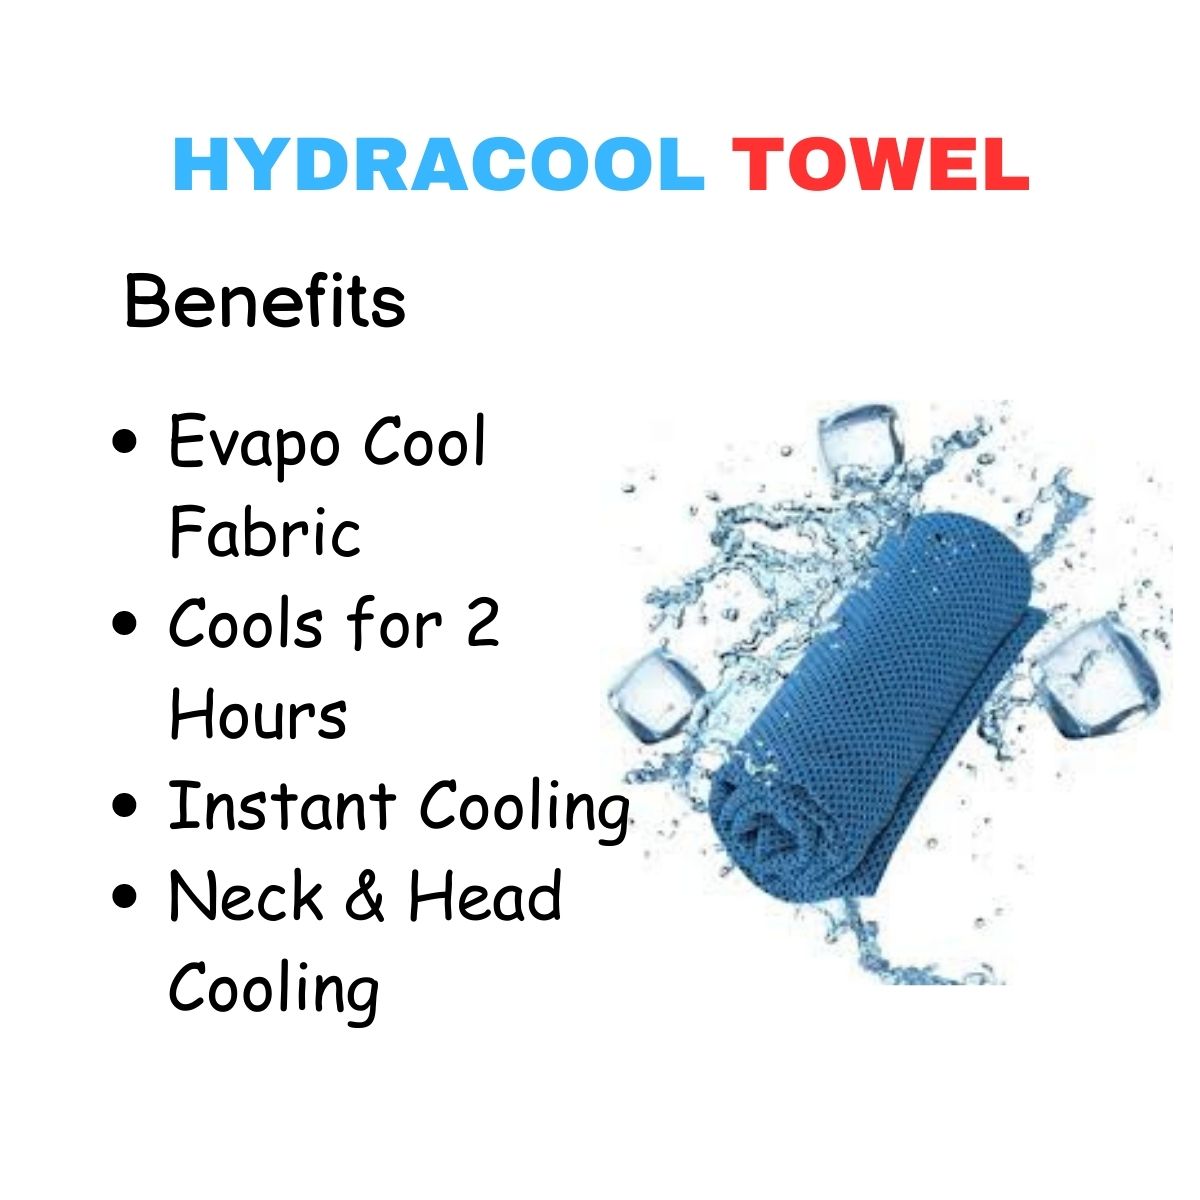 Hydracool Towel (Assorted)